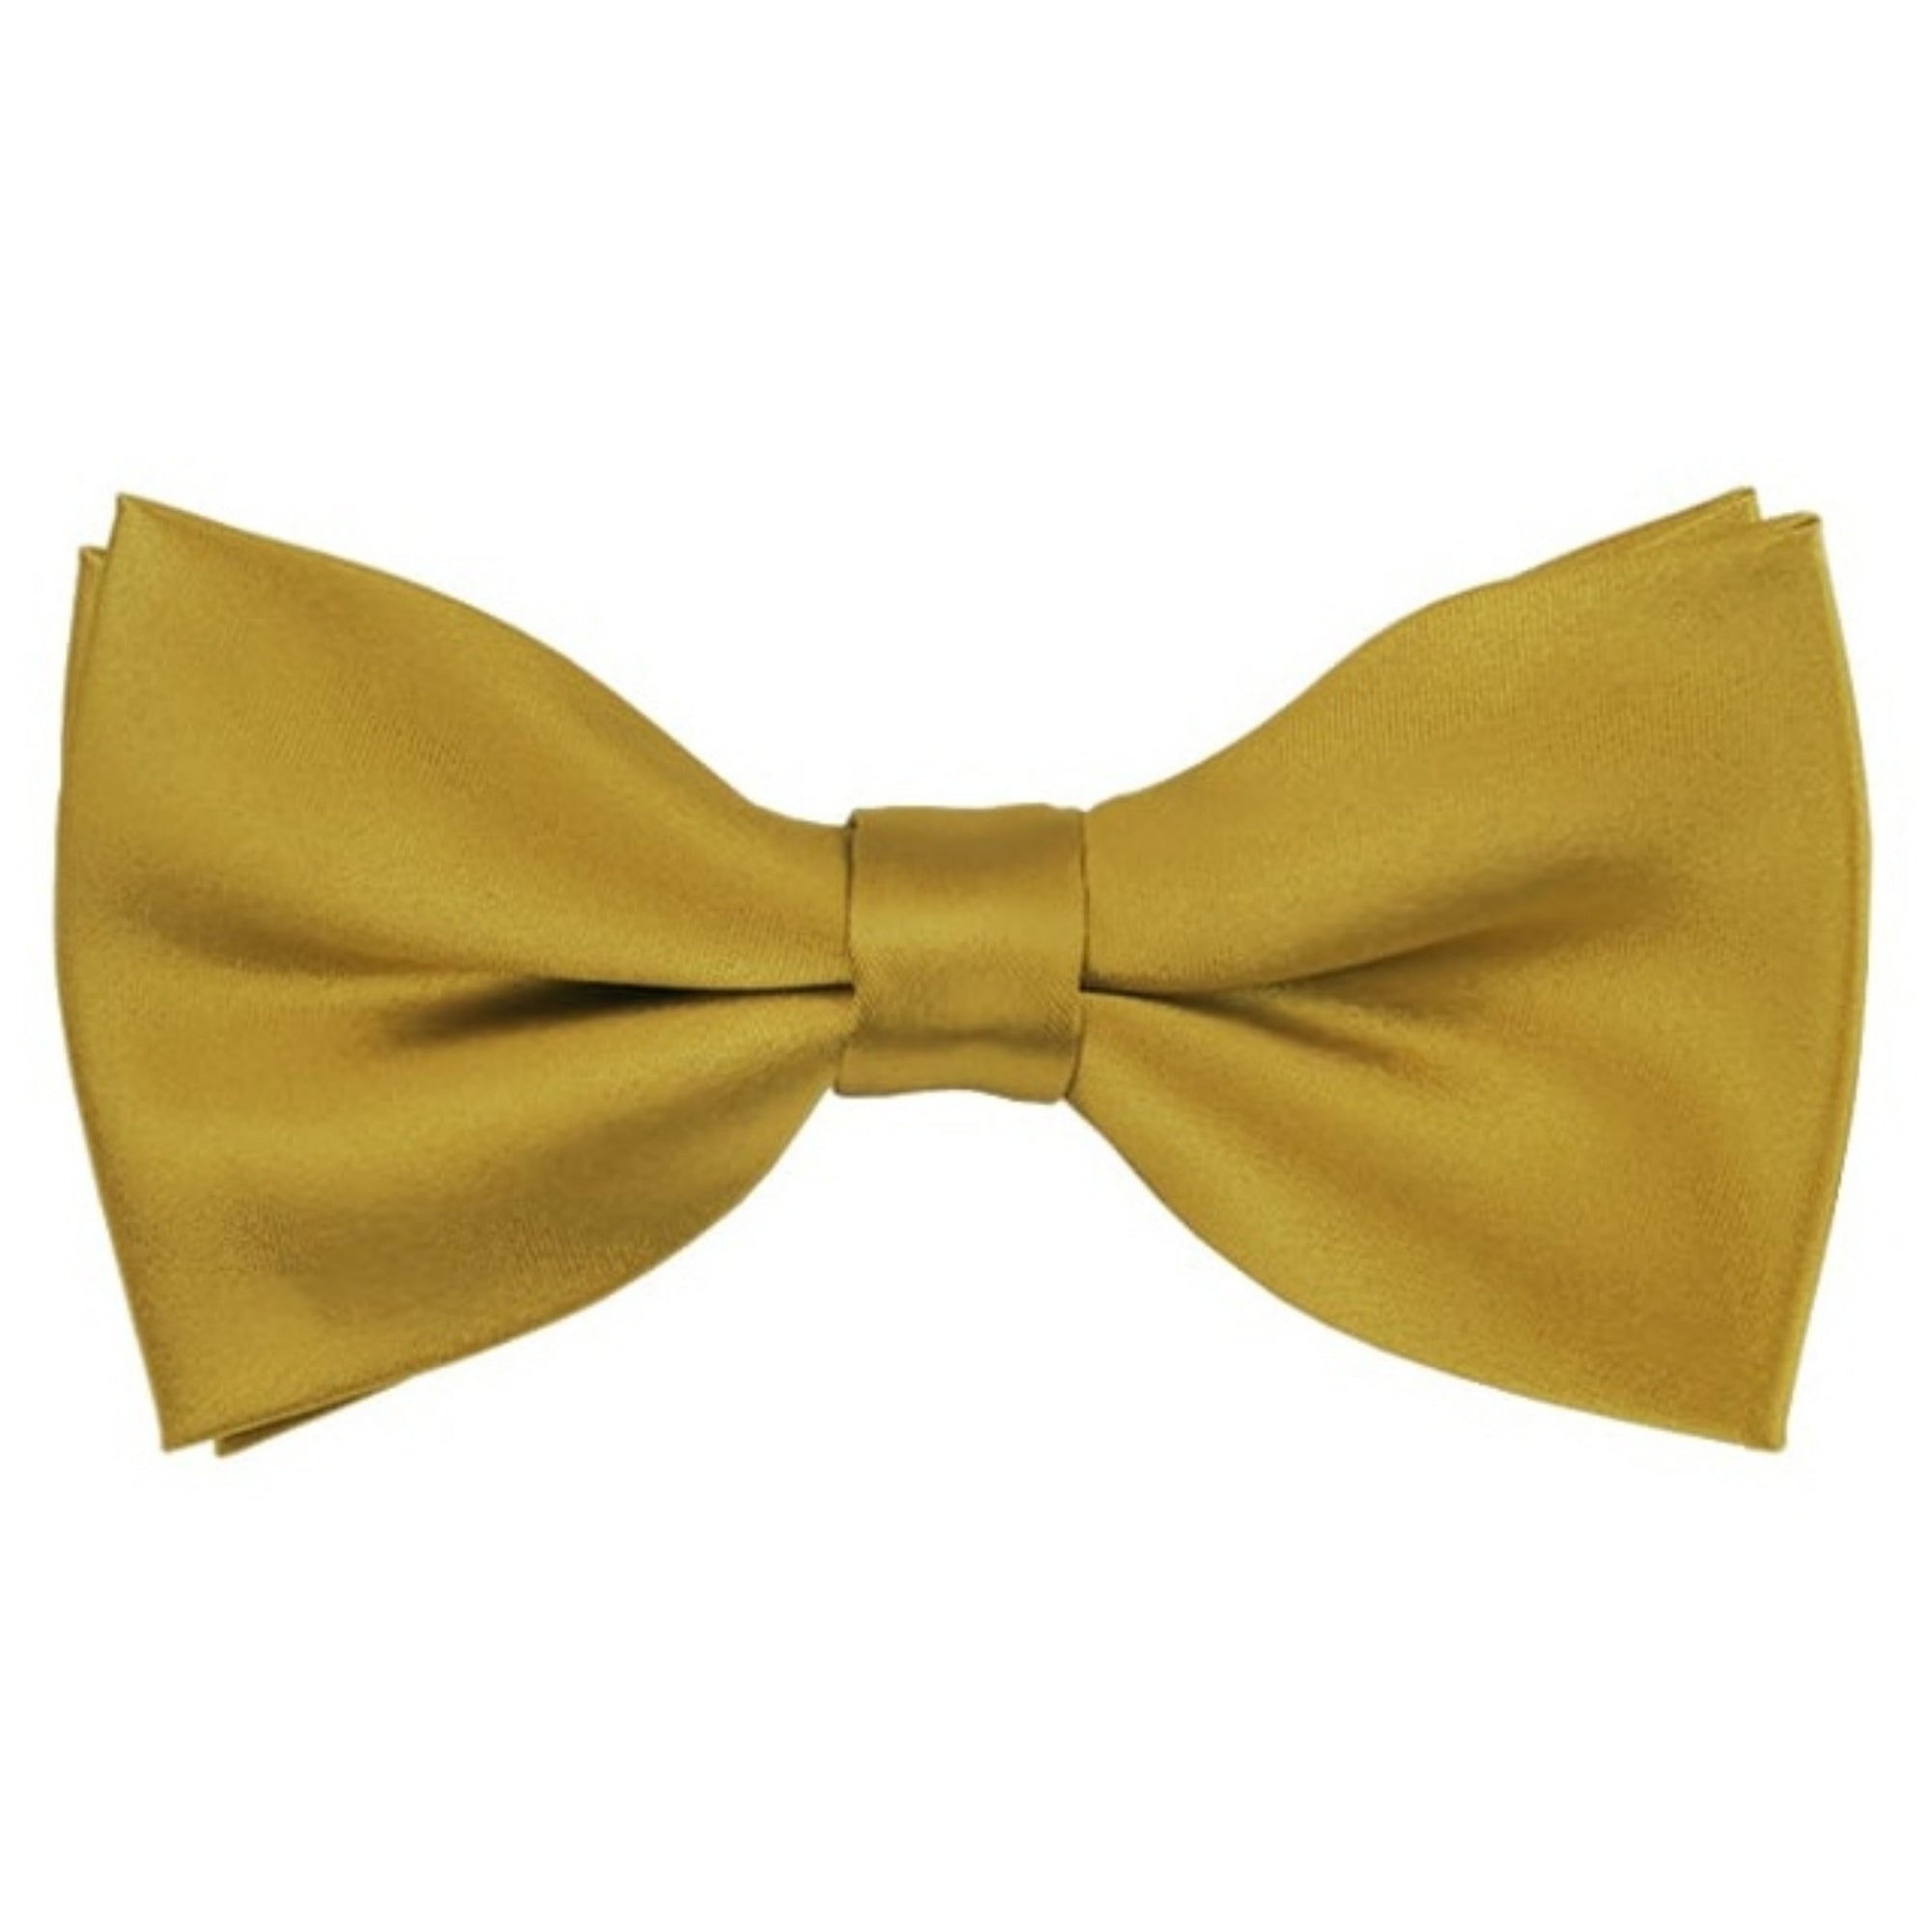 TheDapperTie Men's Solid Color 2.5 W And 4.5 L Inch Pre-Tied adjustable Bow Ties Men's Solid Color Bow Tie TheDapperTie Mustard  